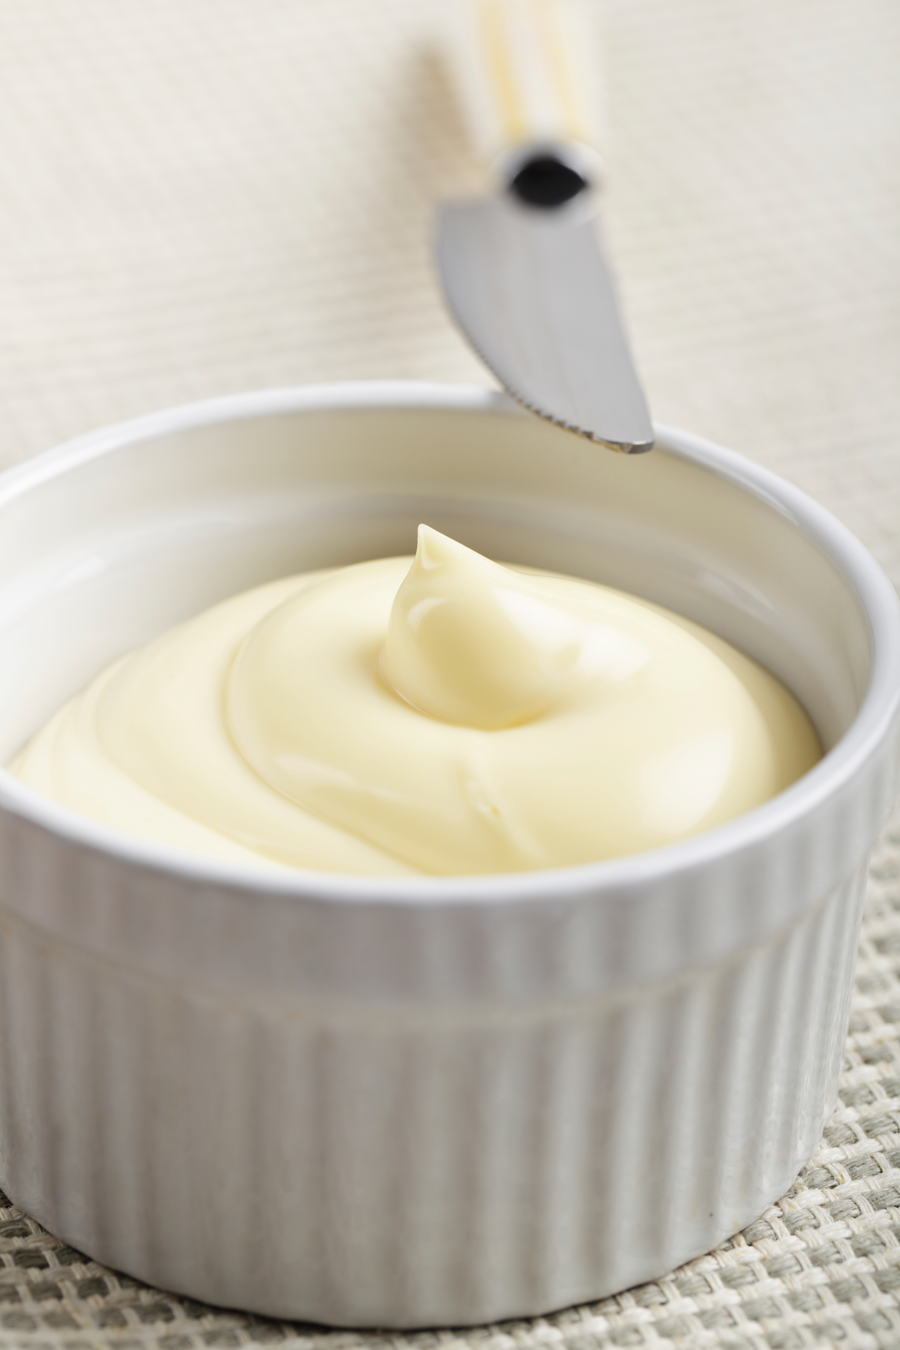 Use an immersion blender for mayonnaise and aioli